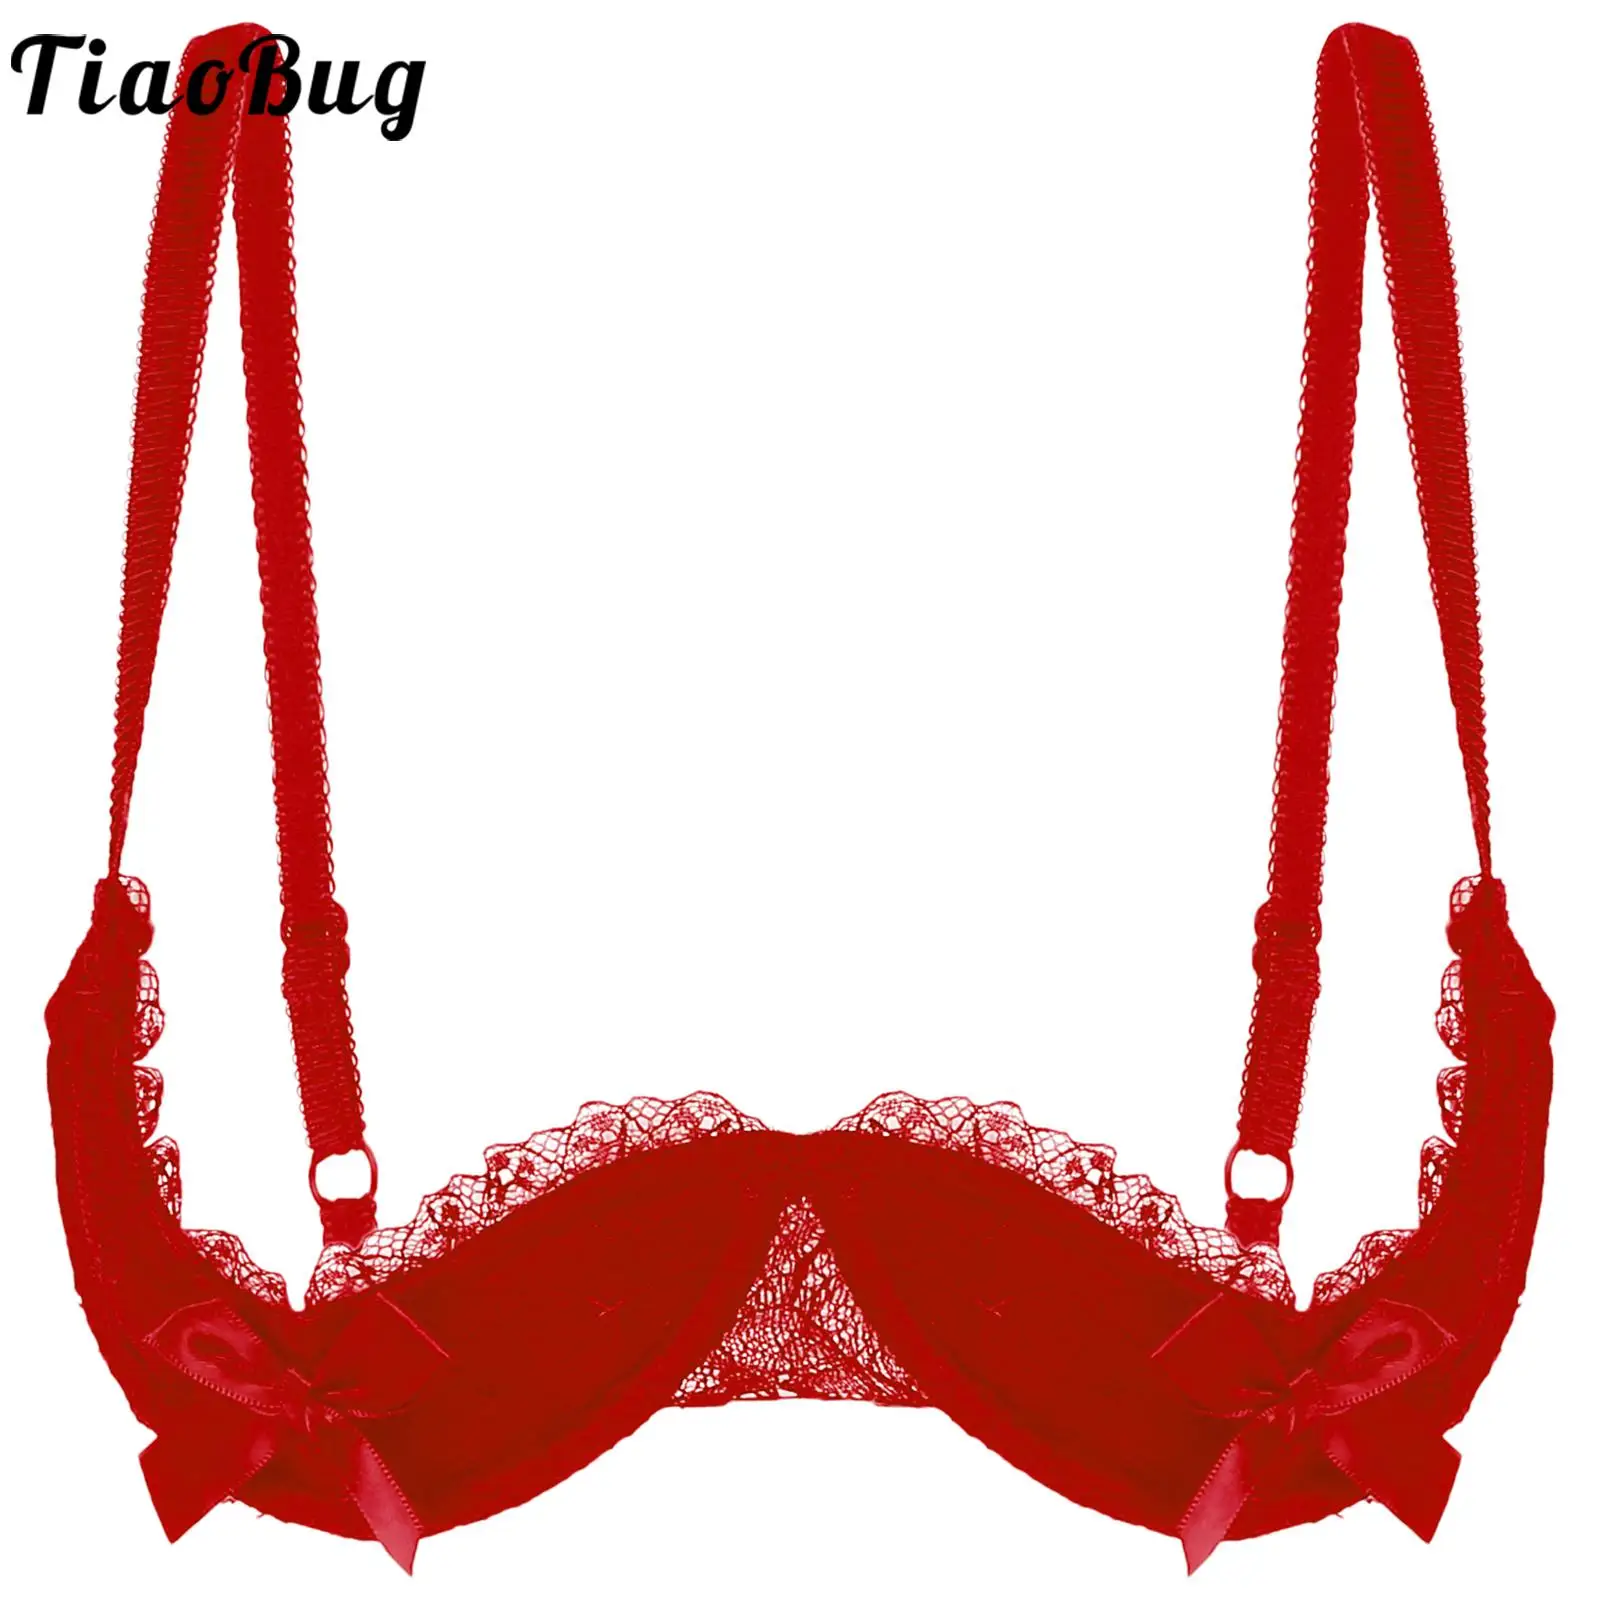 

Womens Lace Padded Bra Lingerie Sexy Open Nipple 1/2 Cup Bra Adjustable Strap Bowknot Push Up Underwired Brassiere Underwear